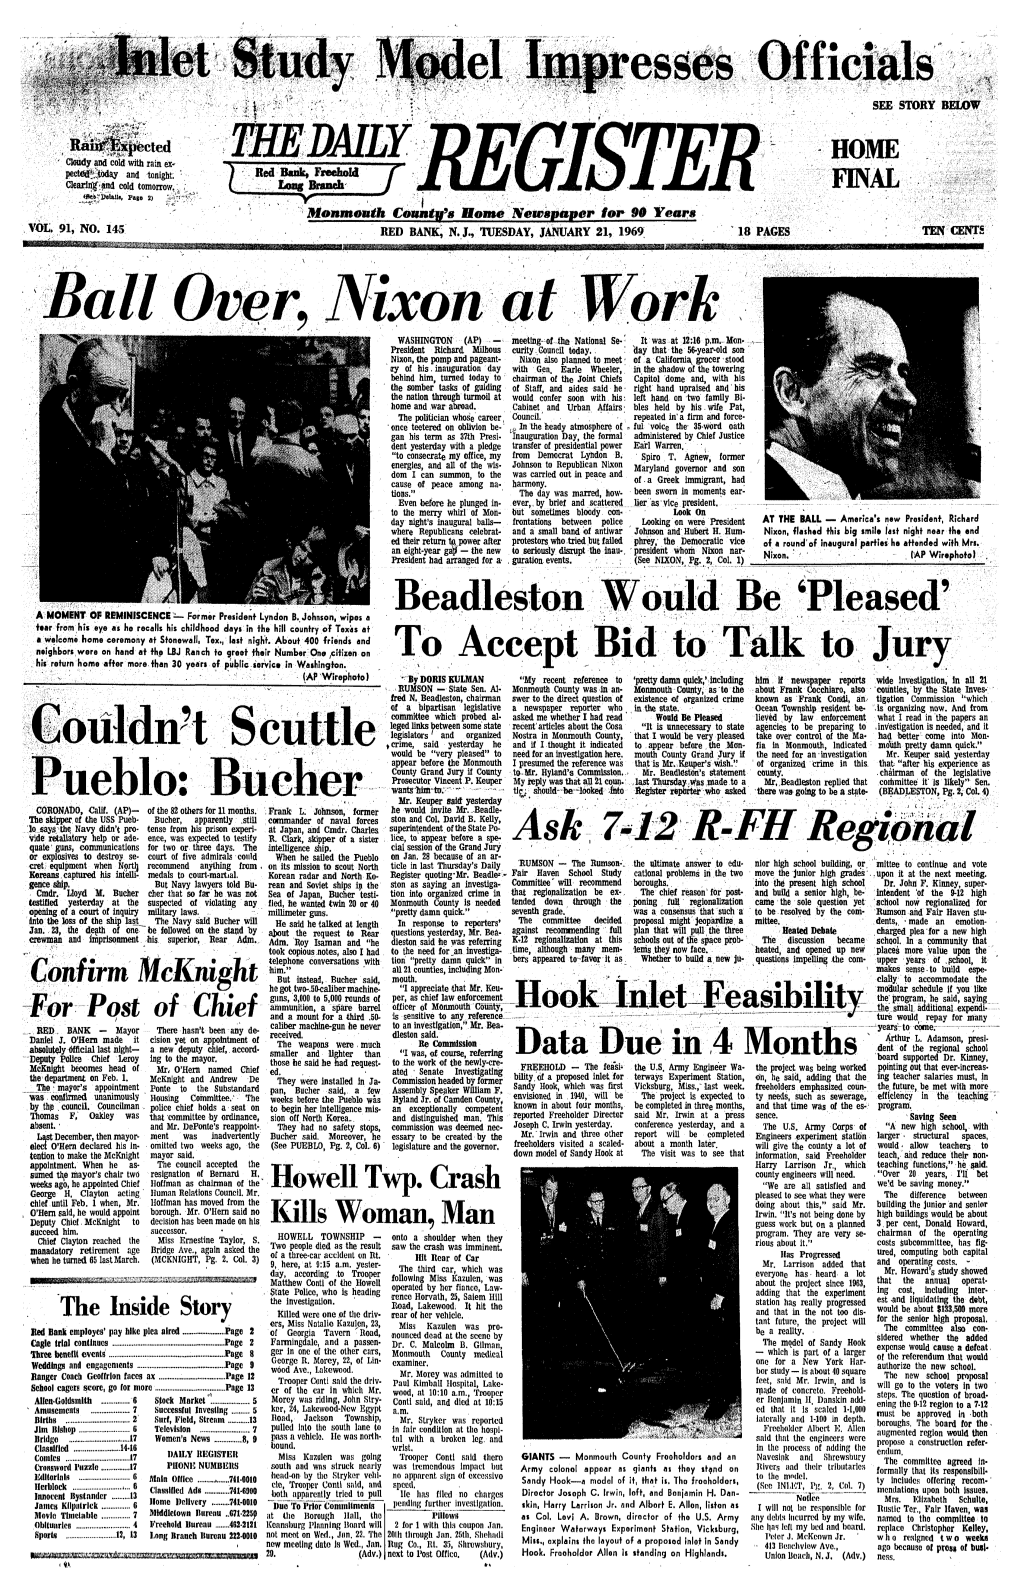 21, 1969 18 PAGES TEN CENTS Ball Oven Nixon at Work WASHINGTON (AP) - Meeting-Of4he National Se- It Was at 12:16 P,M